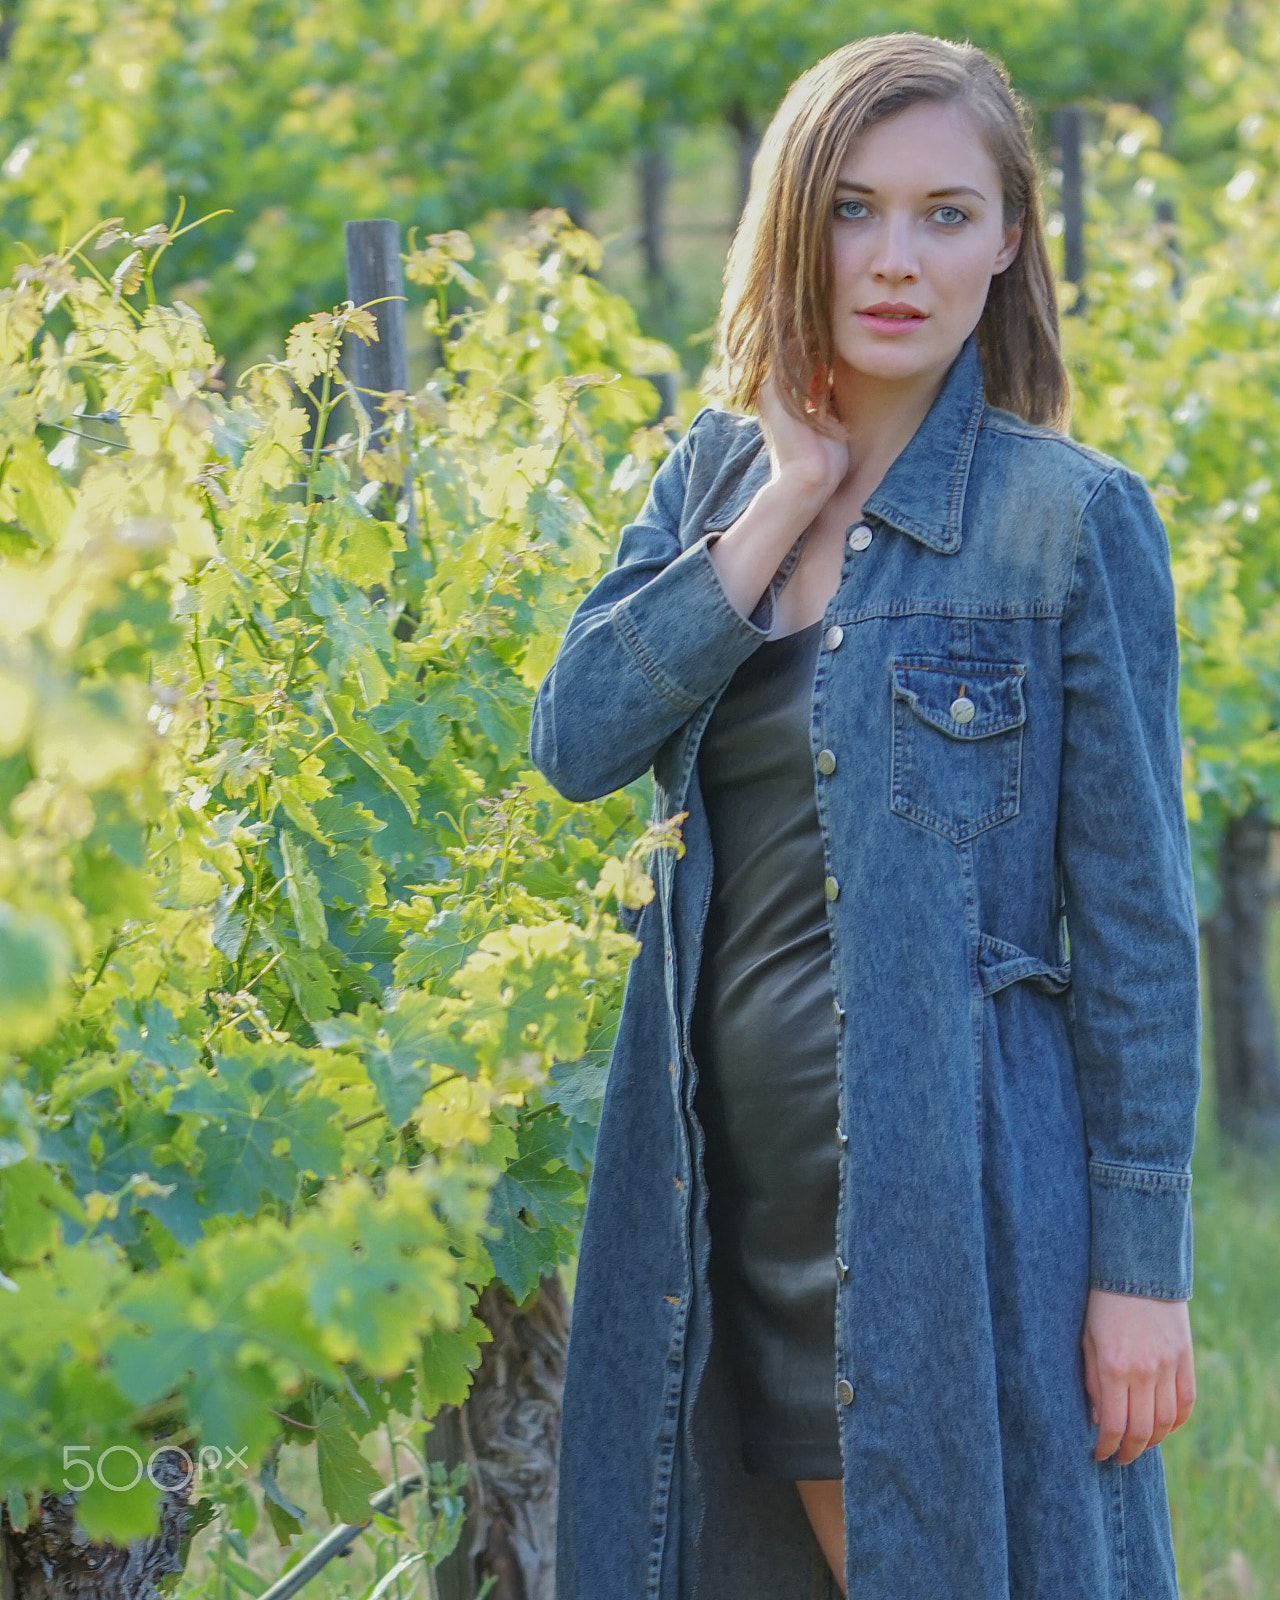 Sony a7R + Sony FE 70-200mm F4 G OSS sample photo. Look what i found in the vineyard photography